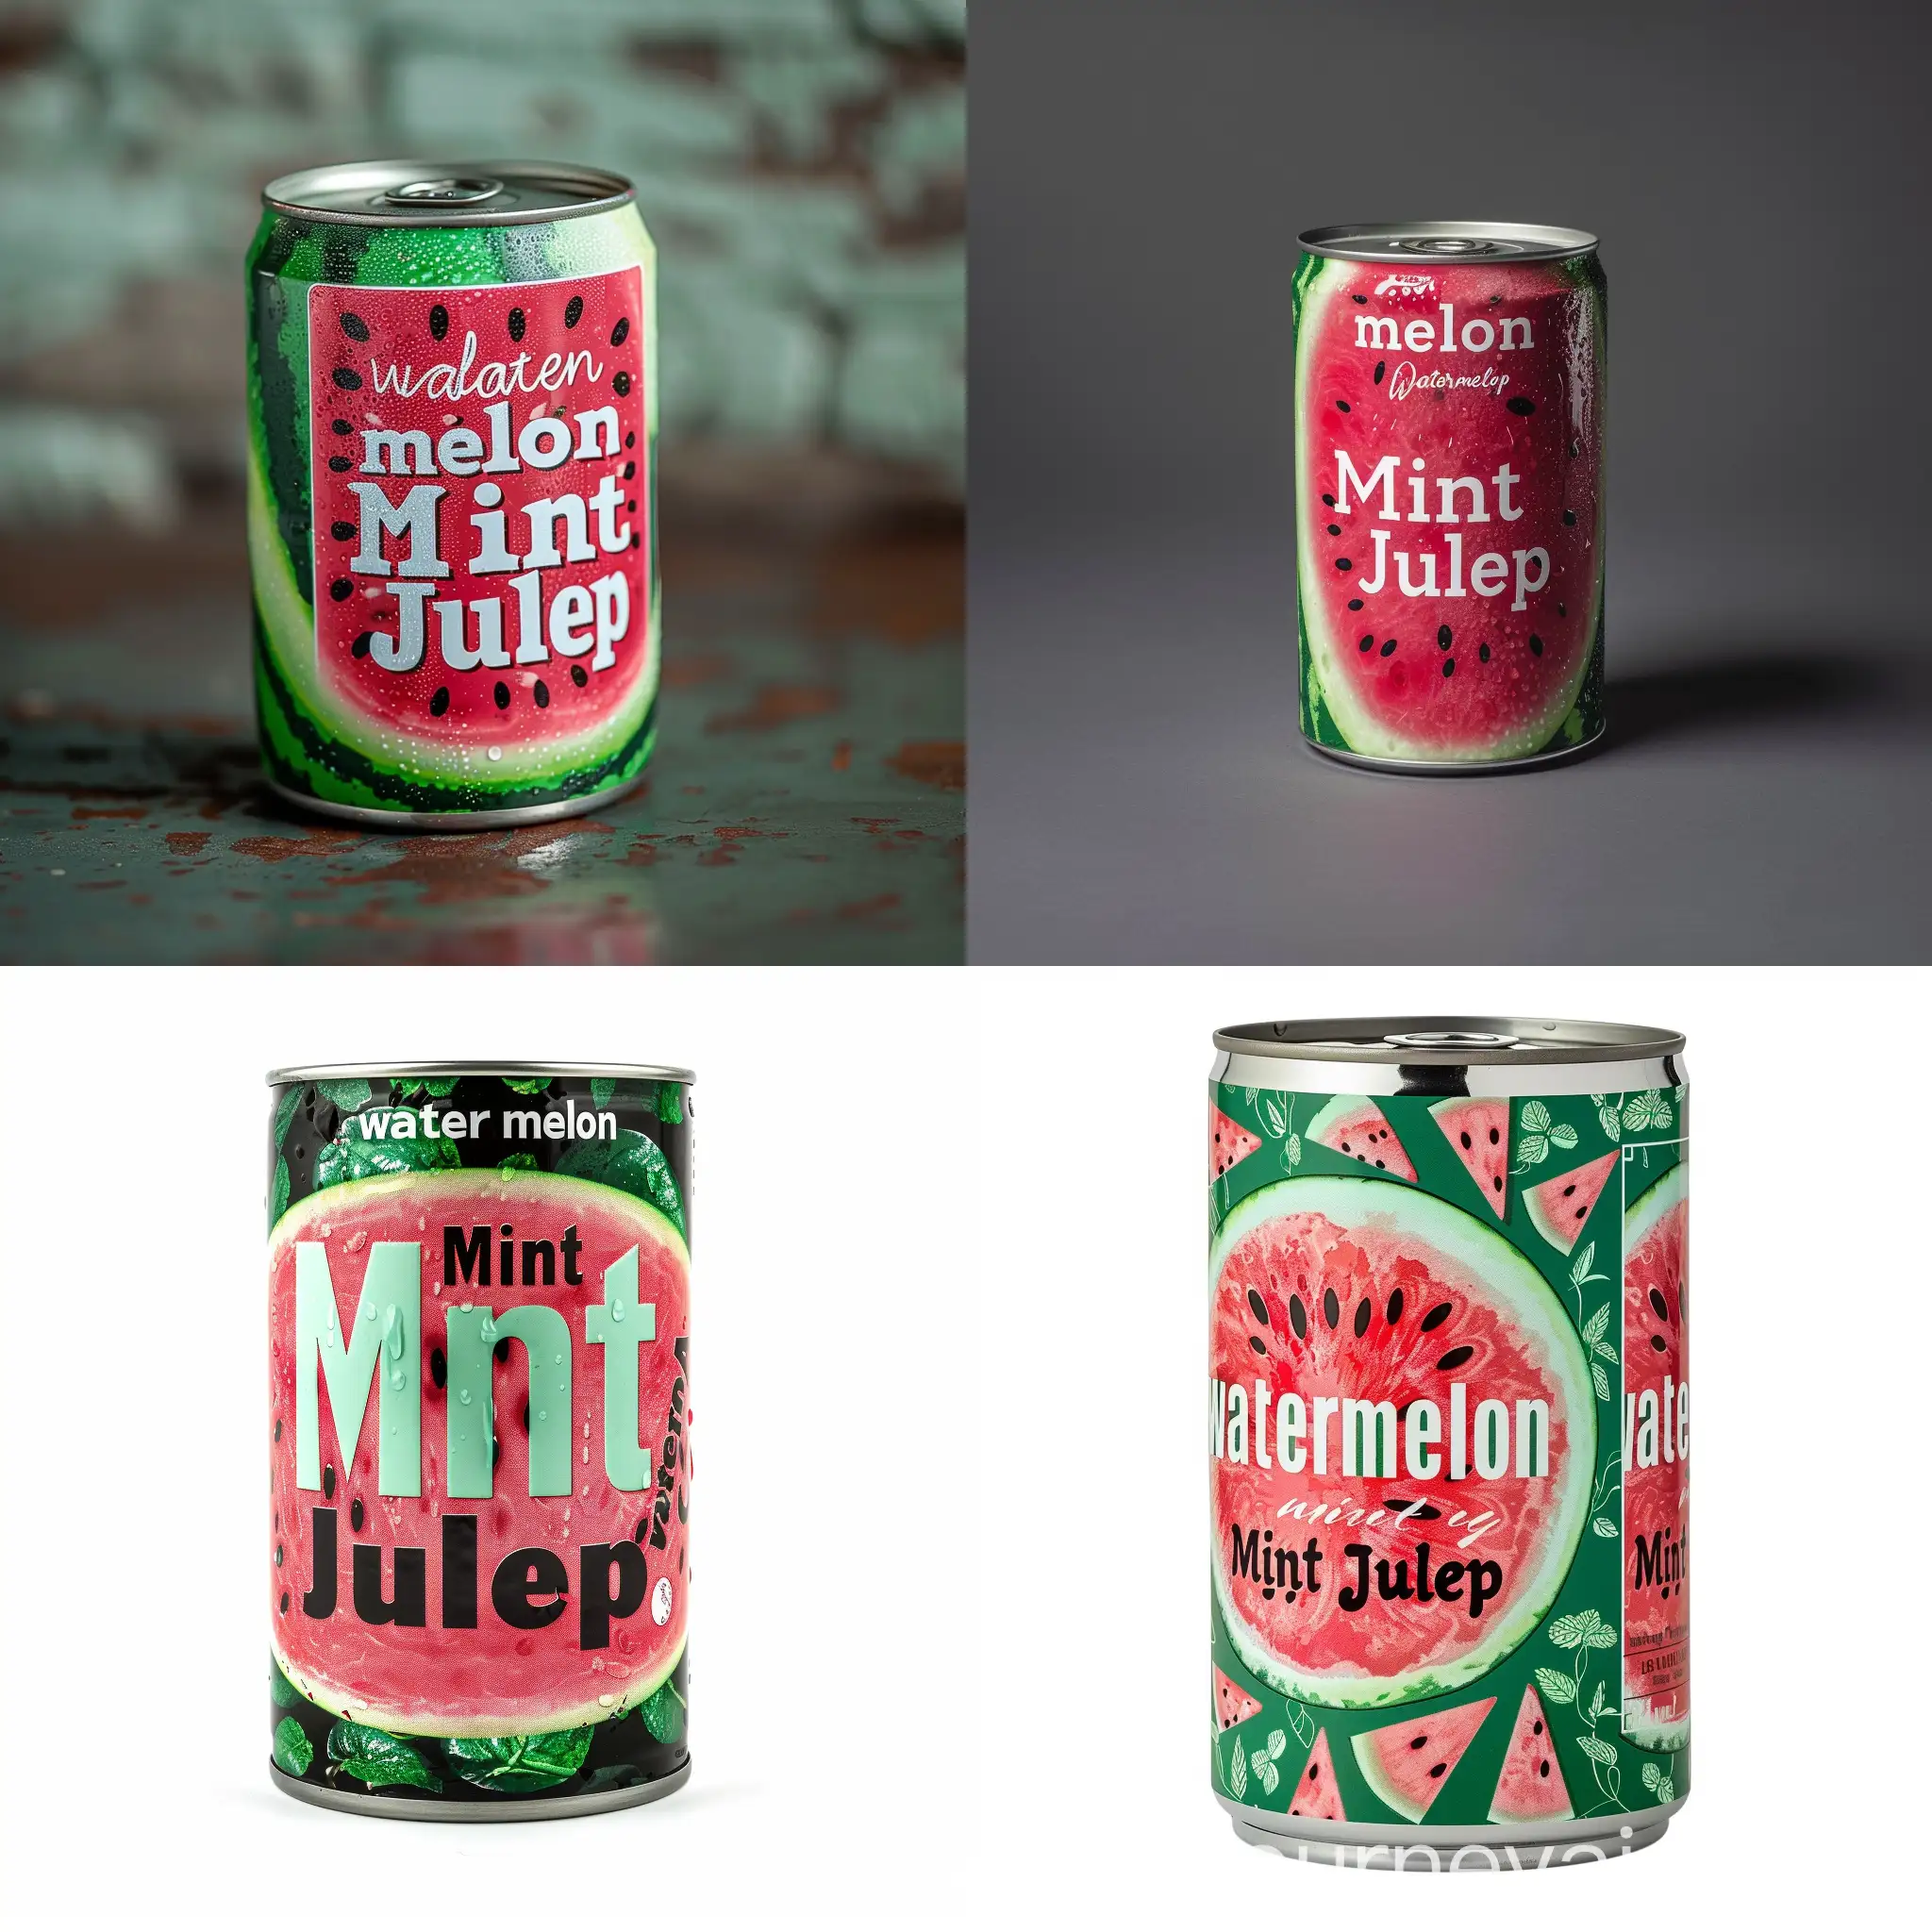 A watermelon four loko can, but replace the “watermelon” text with “Mint Julep”